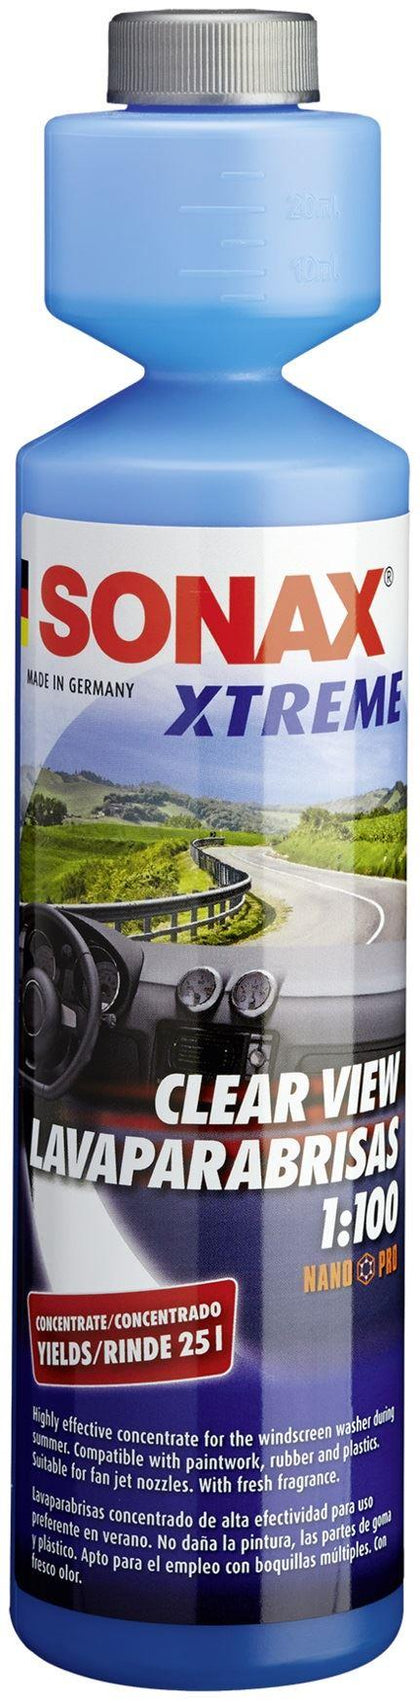 Sonax XTREME Clear View 1:100 Concentrate Nanopro